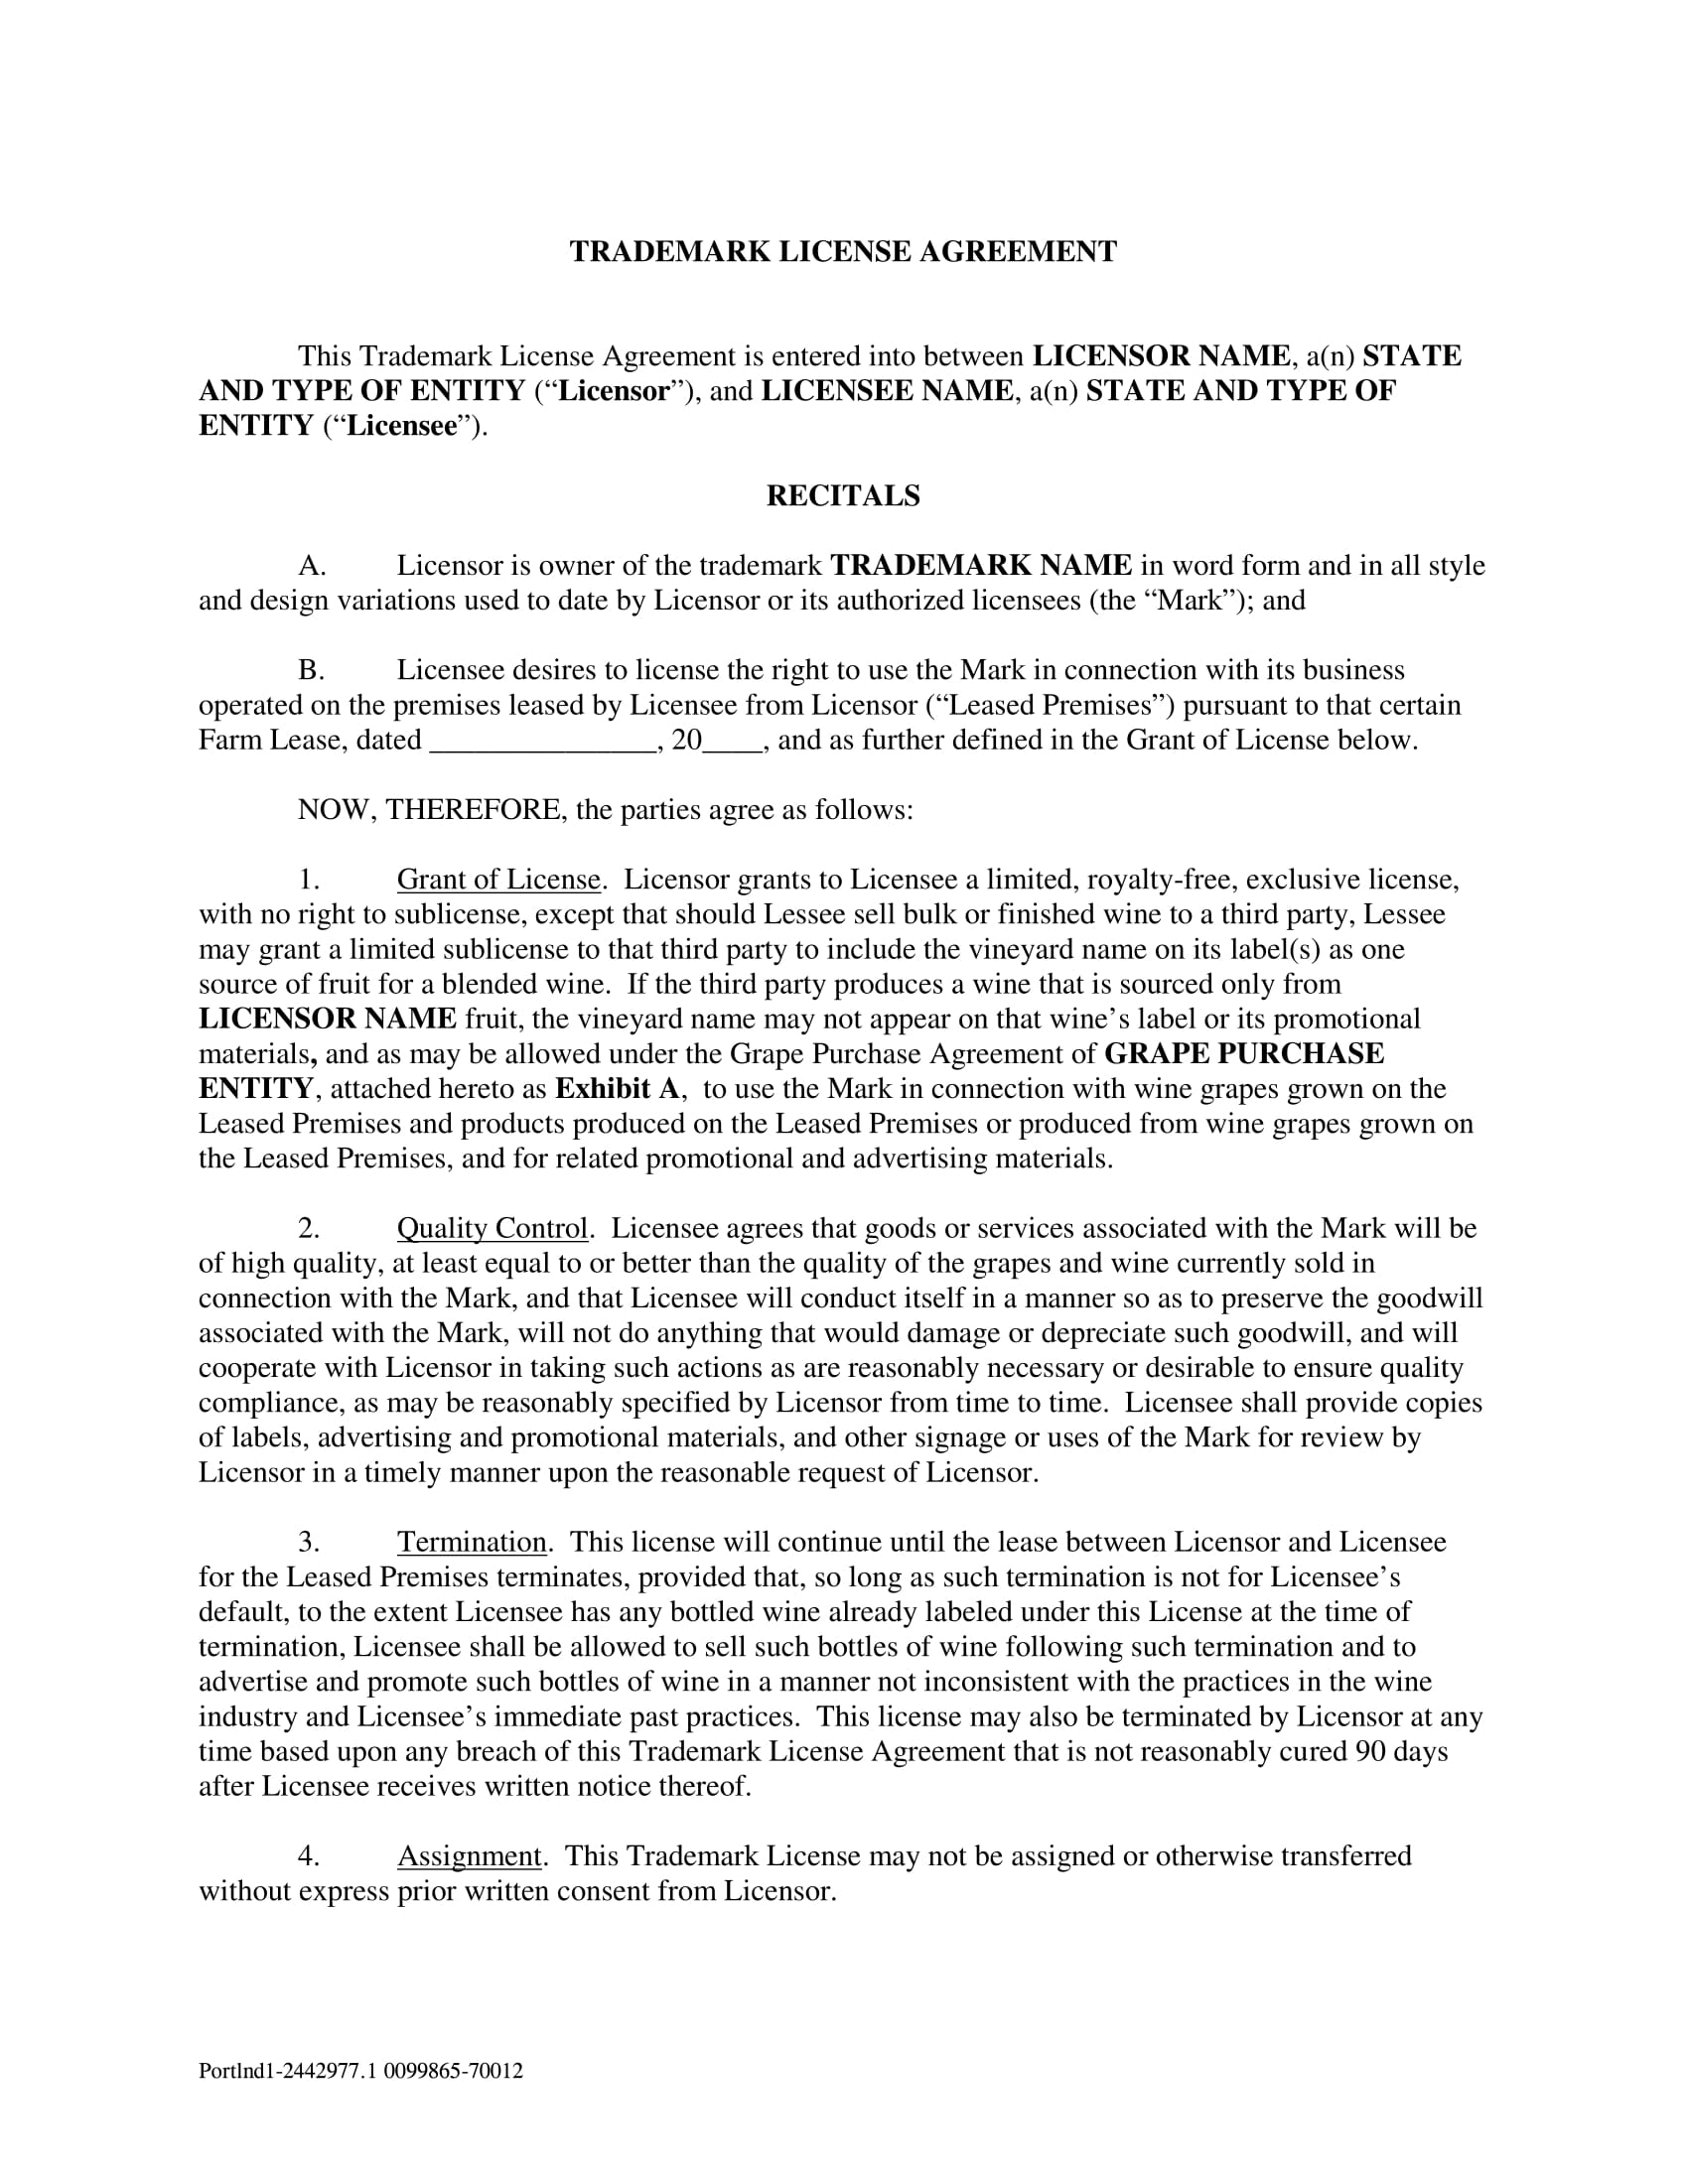 FREE 23+ Trademark License Agreement Forms in PDF  MS Word Within free trademark license agreement template